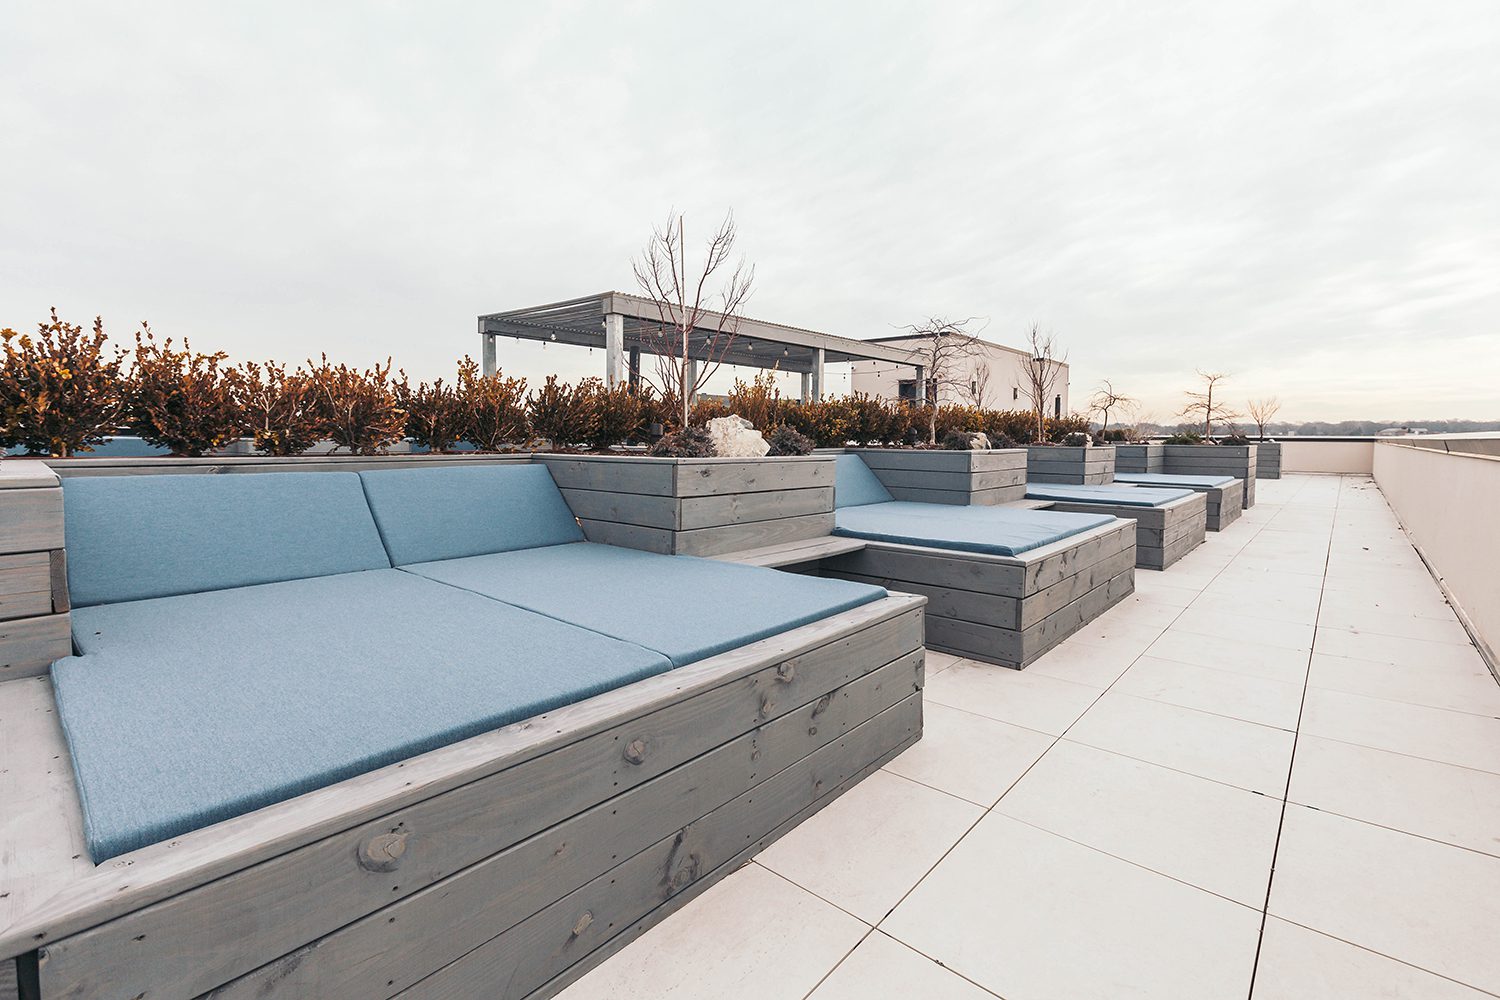 A row of benches with blue cushions on top.